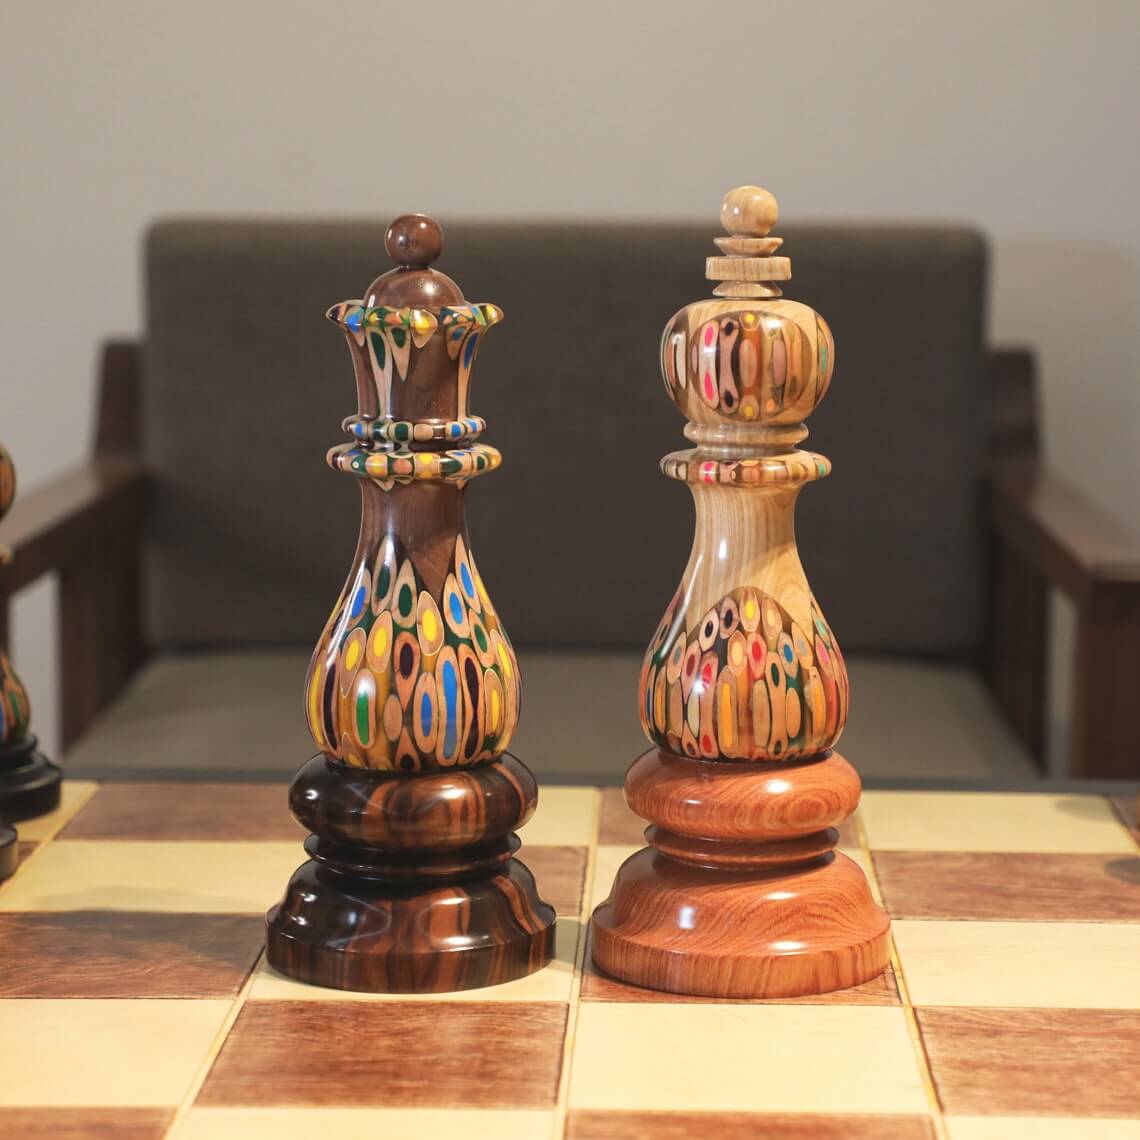 Giant Ornamental King and Queen- Chess Pieces Decor - Deluxe Serial (6)